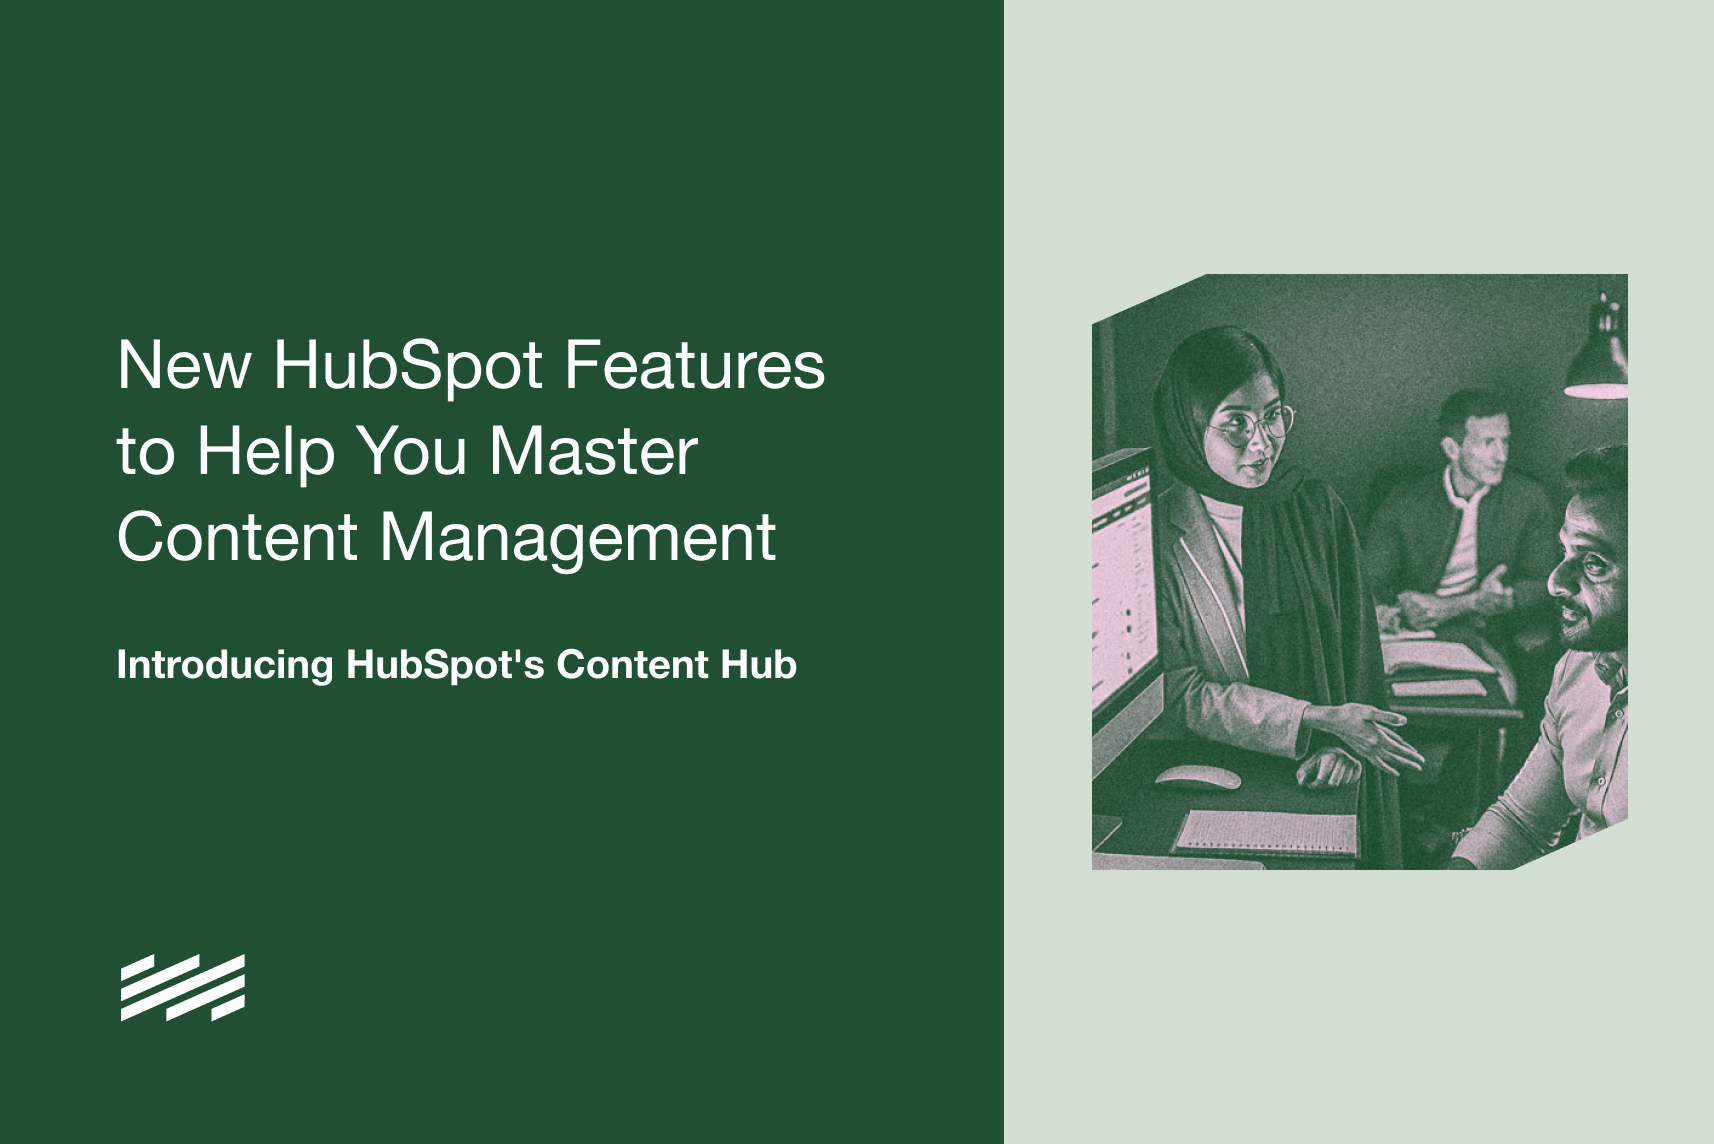 HubSpot's New Content Hub May Help You Finally Master Content Management